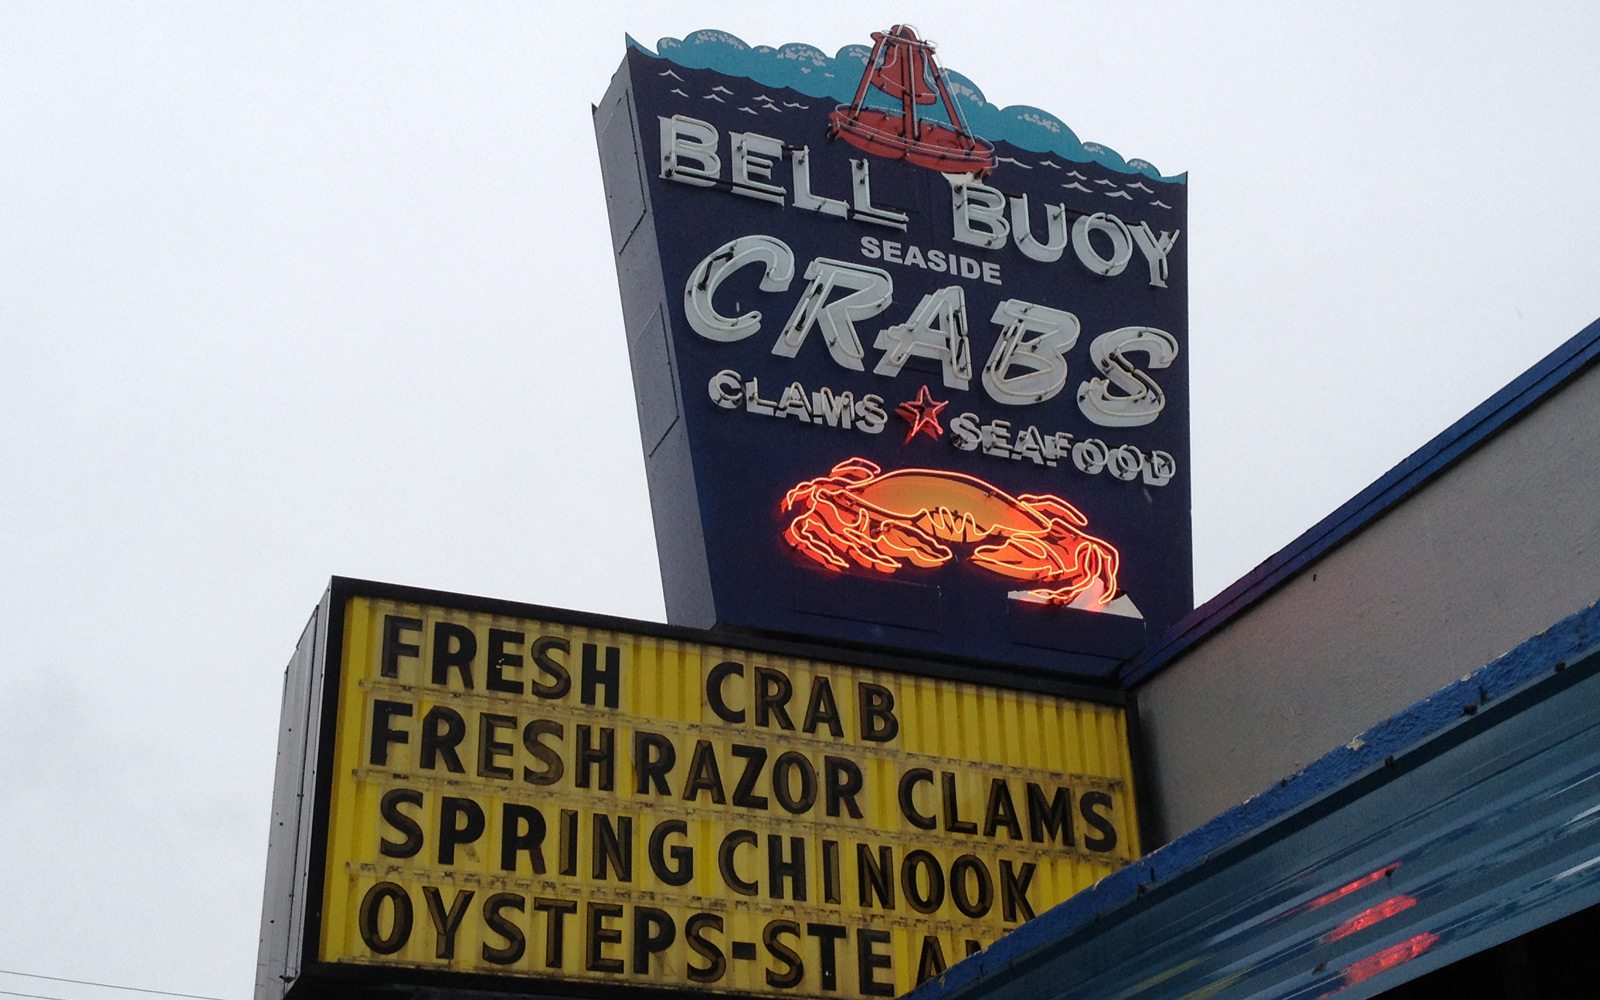 Bell Buoy of Seaside offers fresh seafood and features ready-to-eat items in an adjacent restaurant.